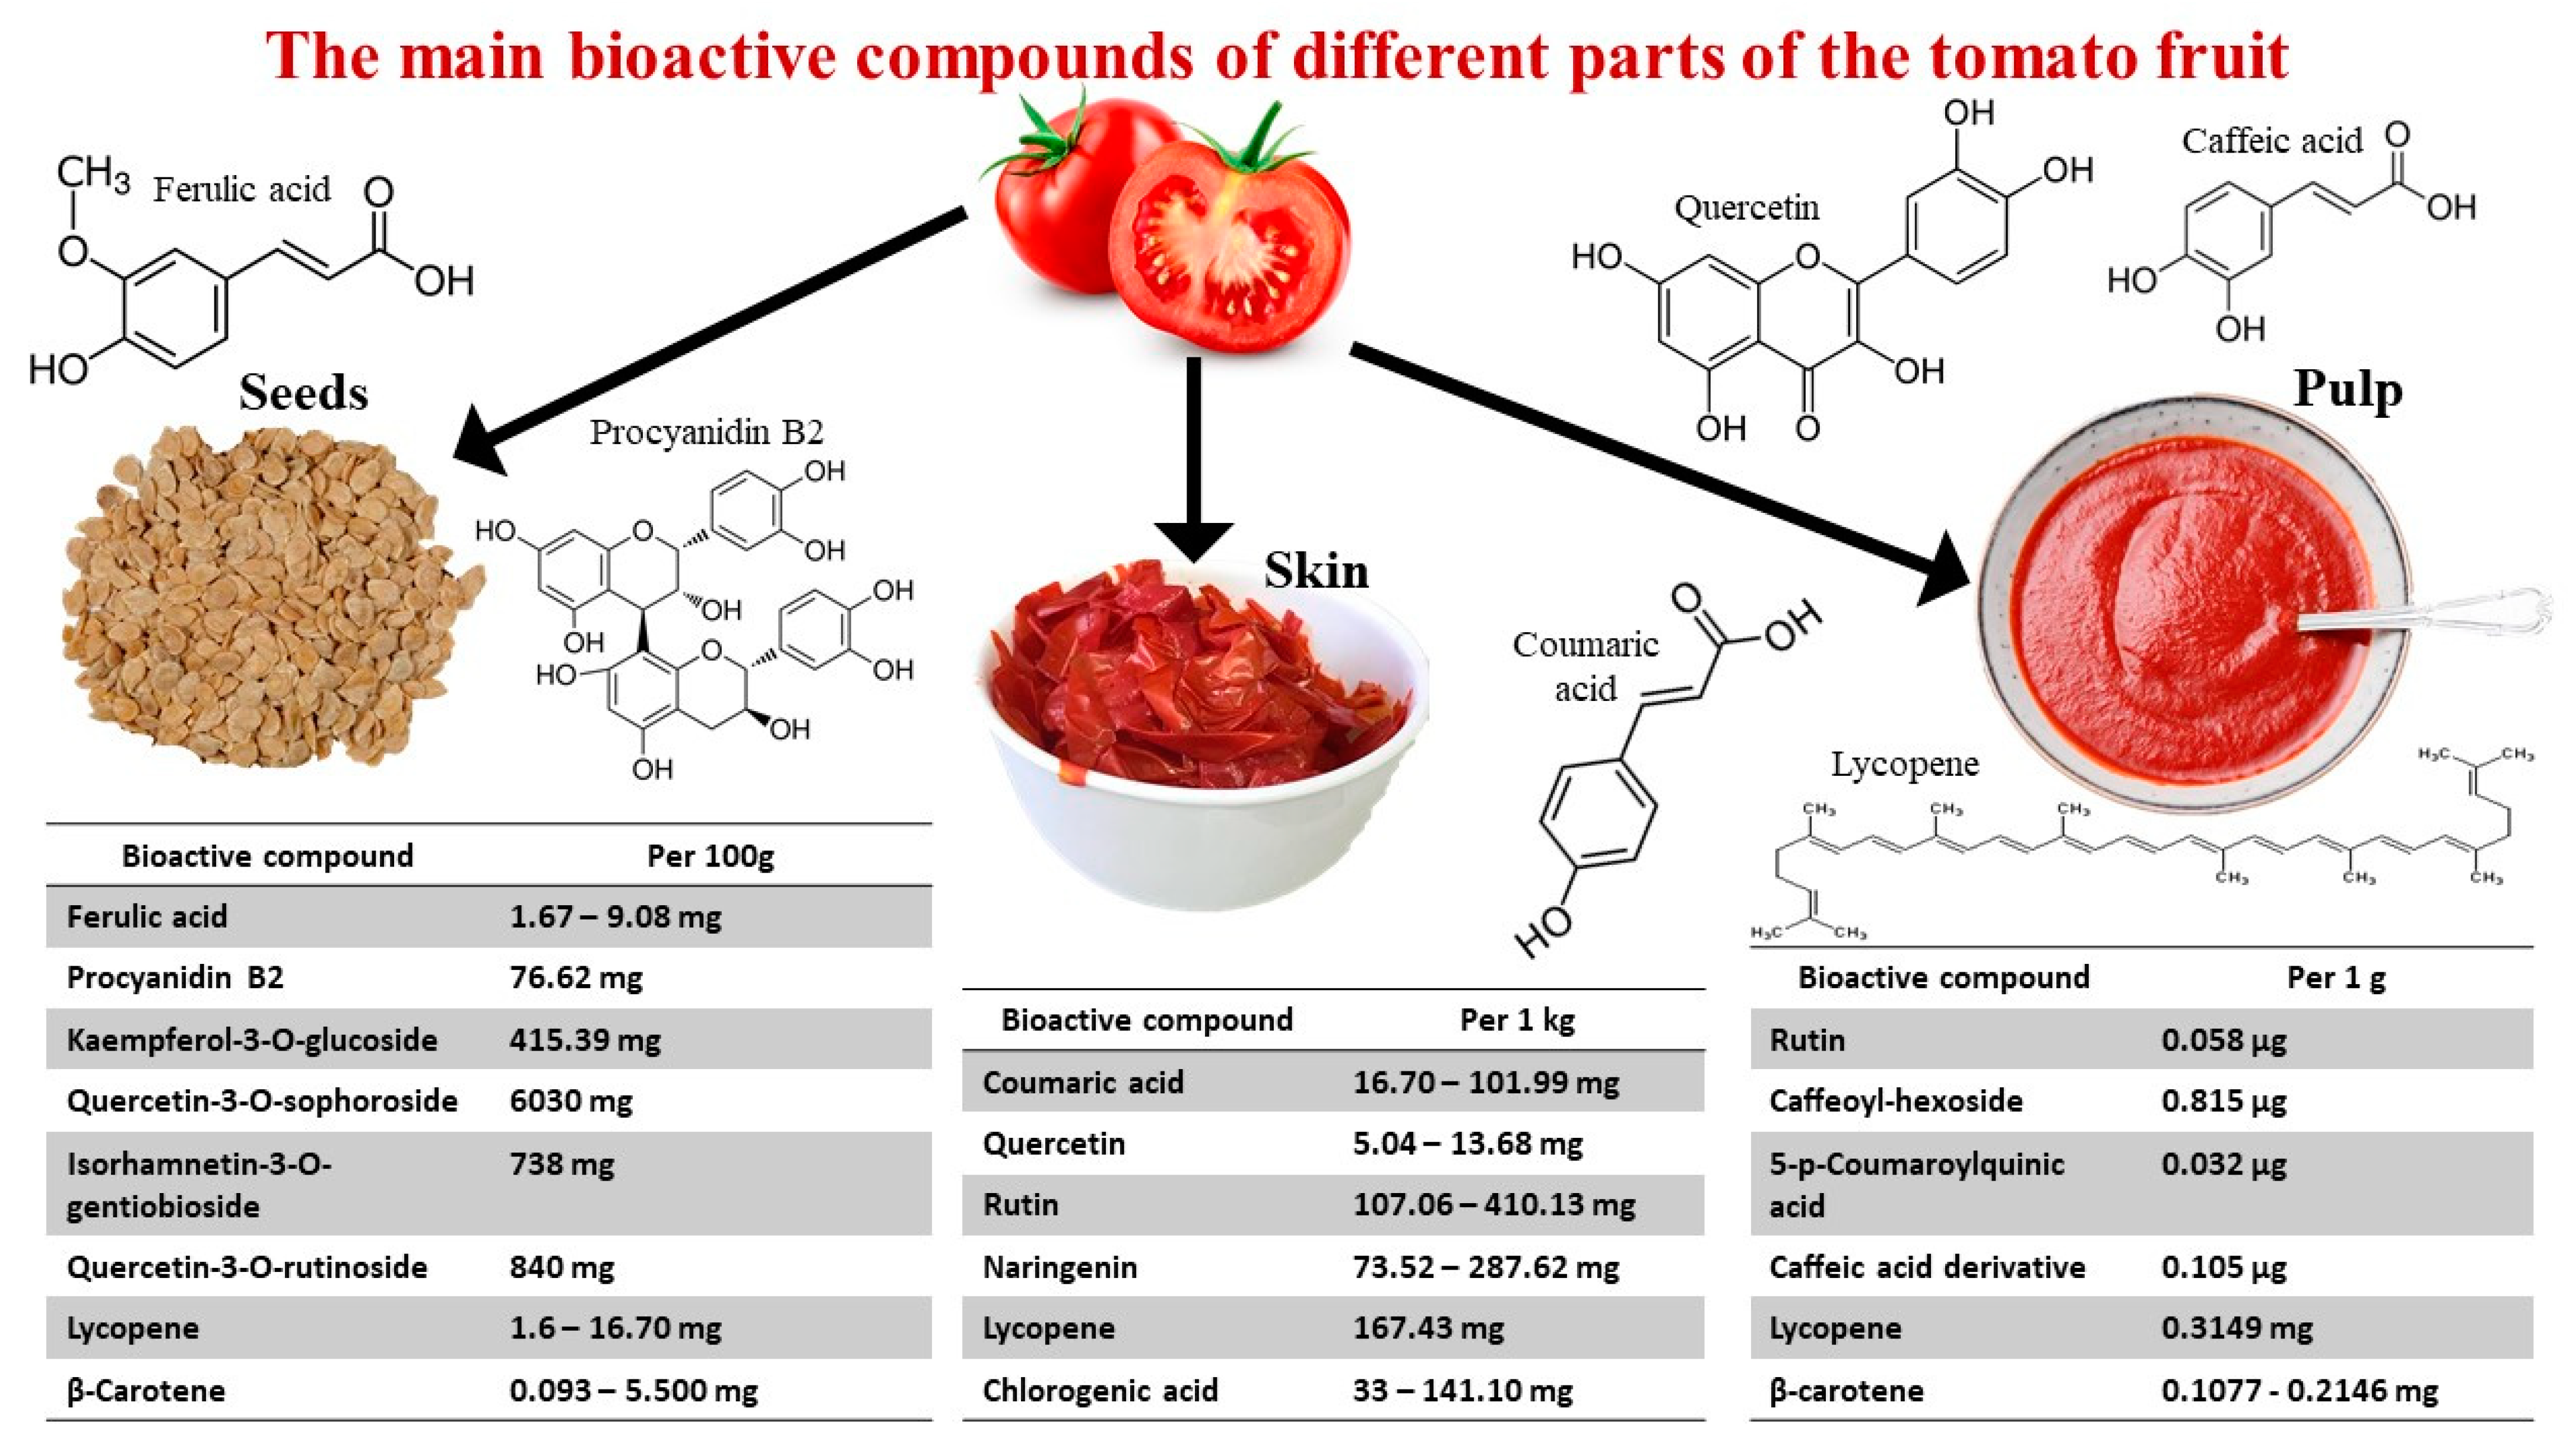 Full article: Blood orange (Citrus sinensis) as a rich source of  nutraceuticals: investigation of bioactive compounds in different parts of  the fruit by HPLC-PDA/MS